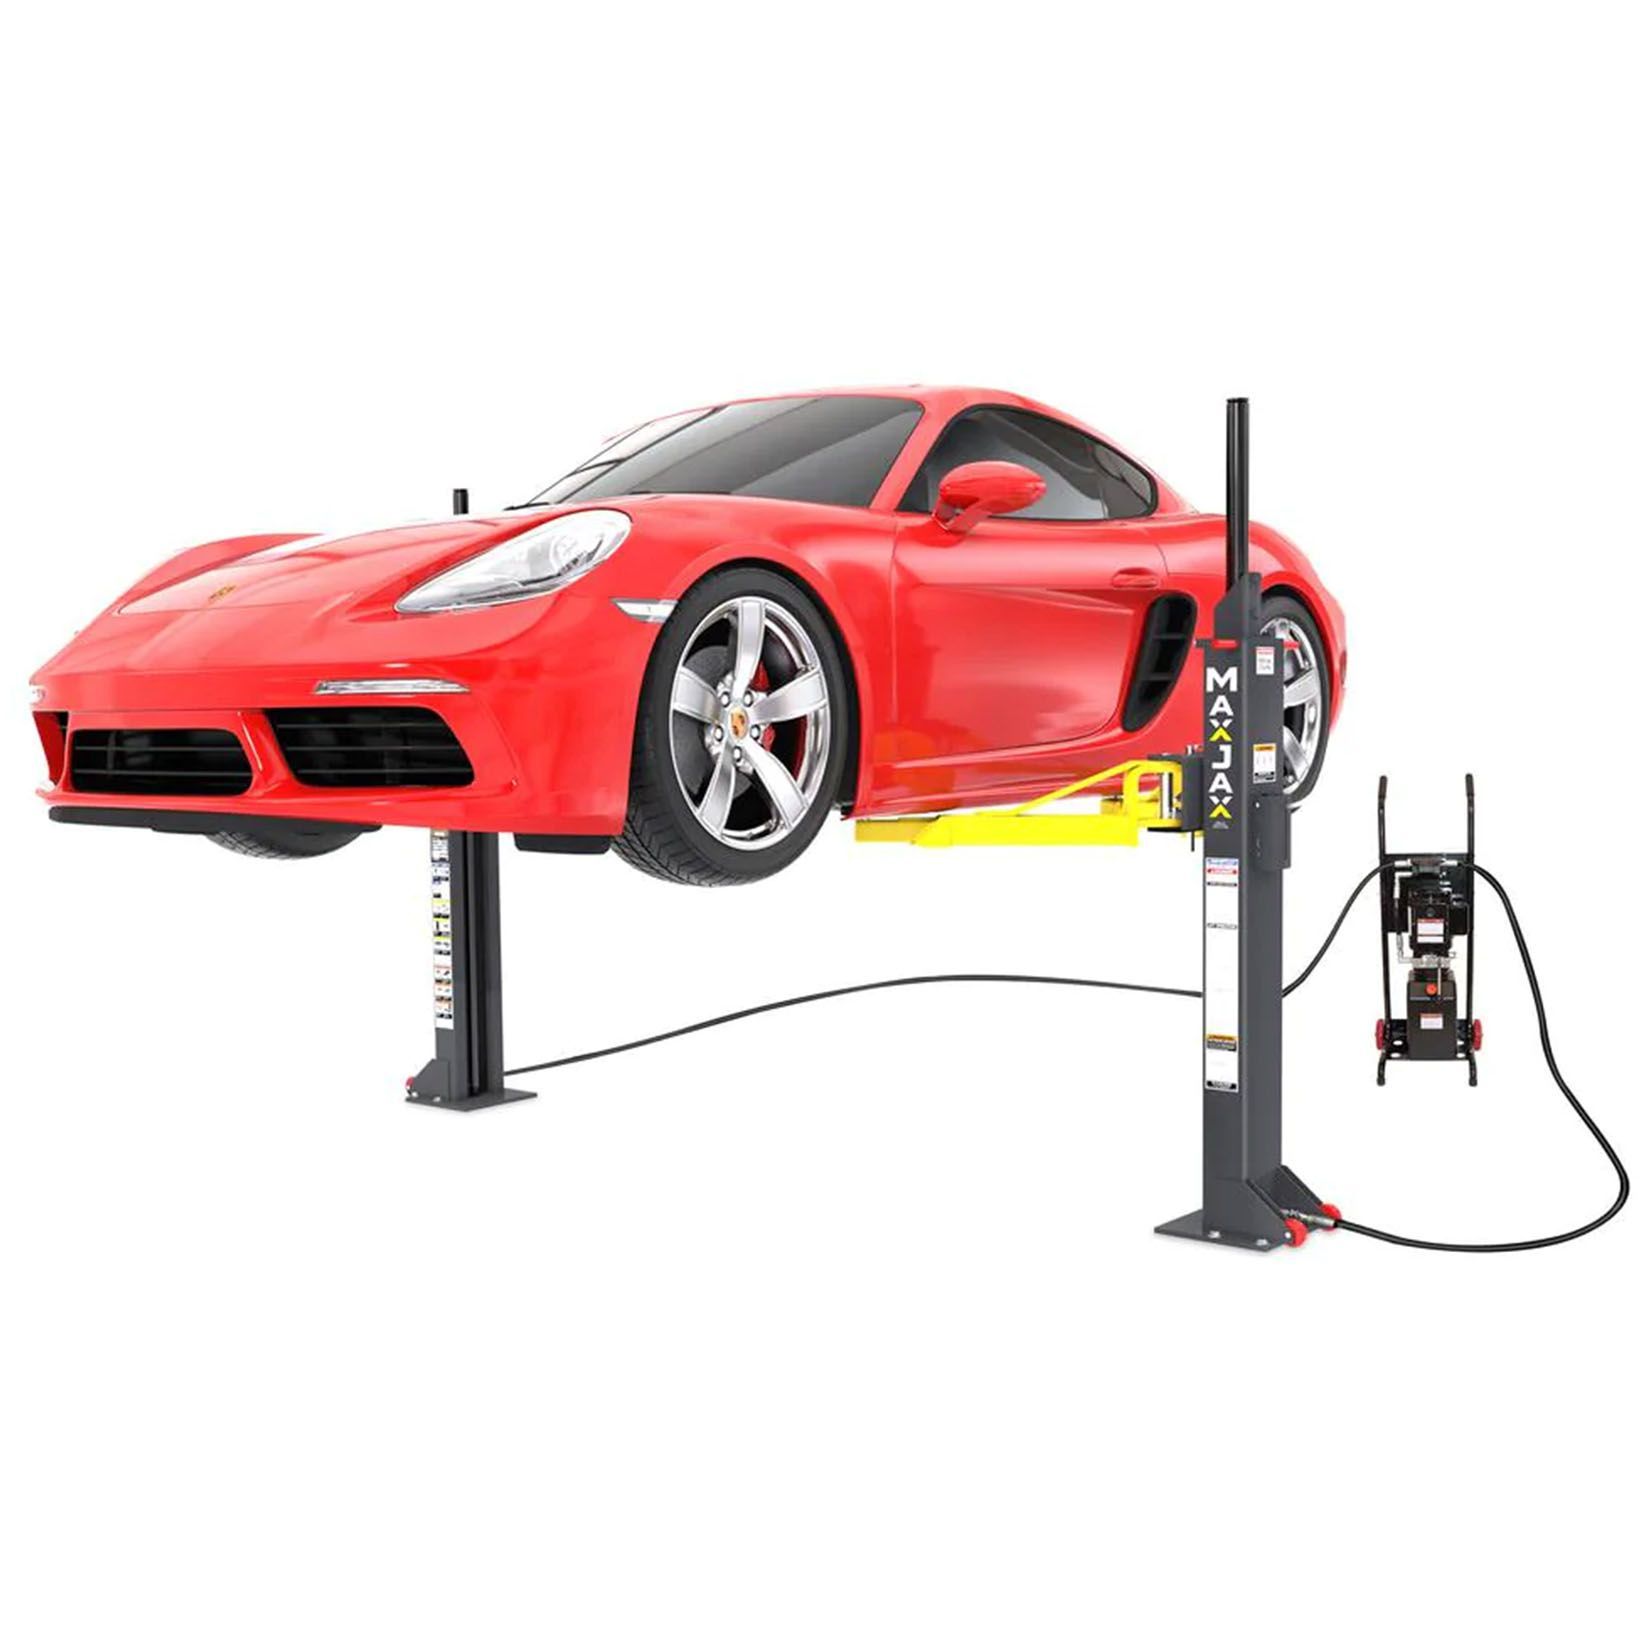 Vehicle Lifts For Your Home Garage, Best Lift For Garage